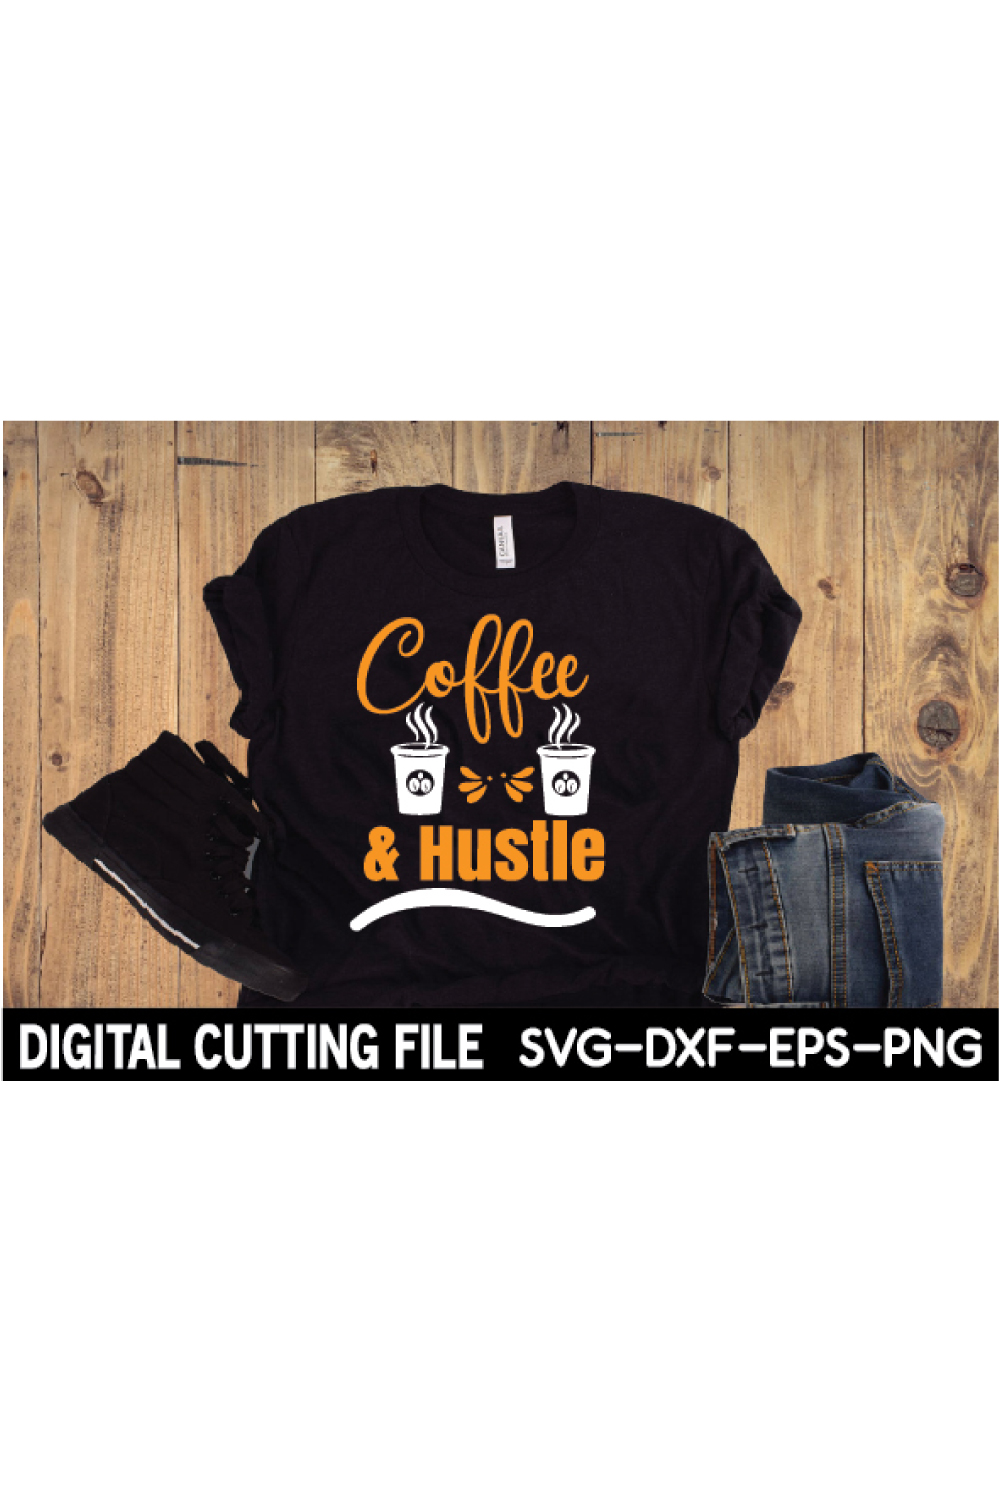 Black shirt with coffee and hustle on it.